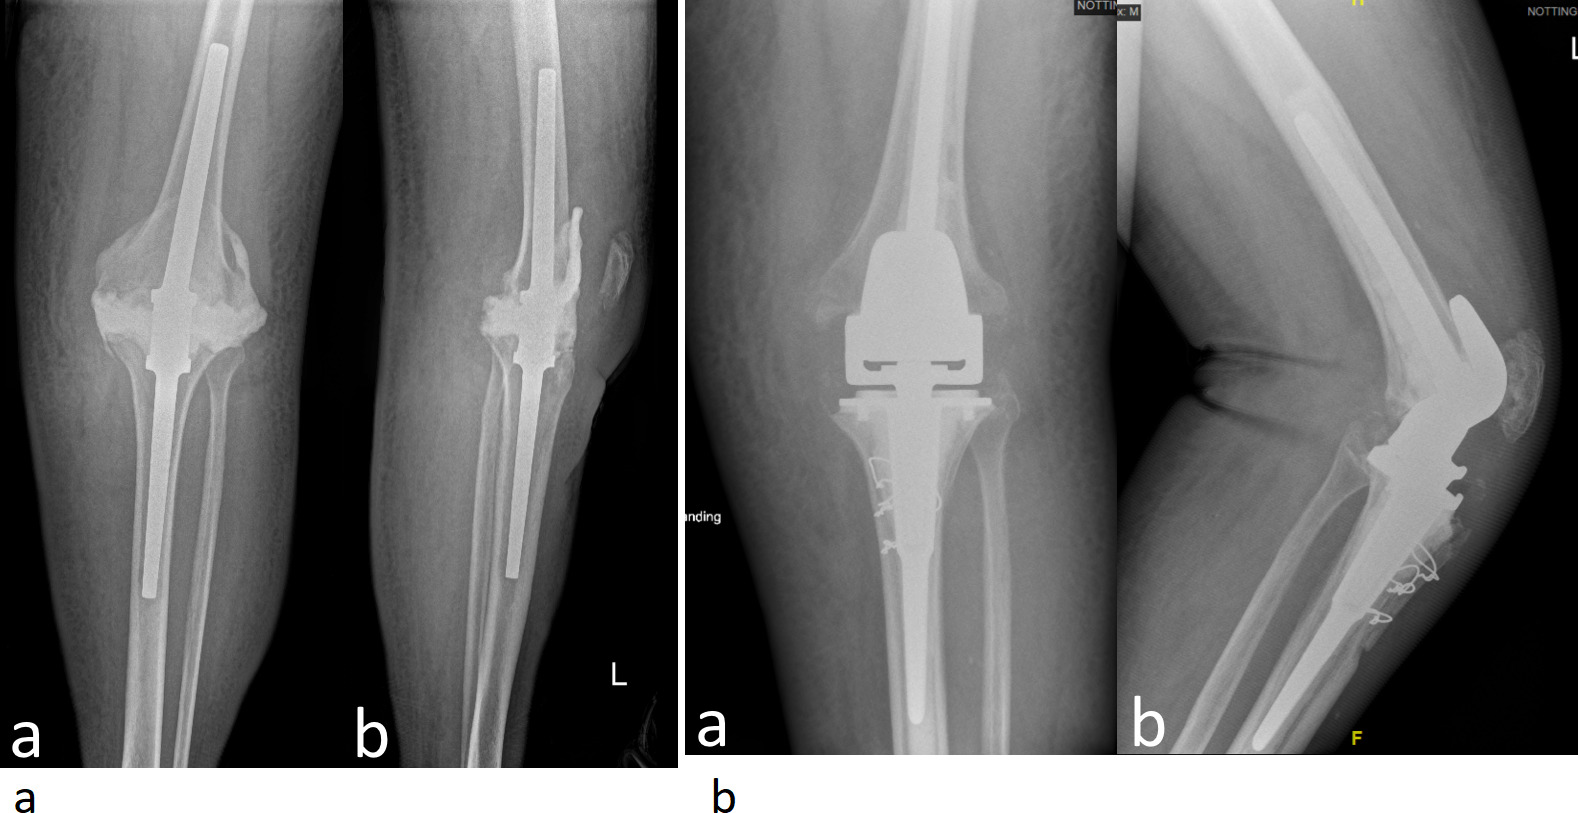 Fig. 2 
          a) Preoperative anteroposterior and lateral radiographs of left knee in a 79-year-old female with a fusion nail following first-stage revision for infection. b) Anteroposterior and lateral radiographs at three-year follow-up using Stanmore Modular Individualized Lower Limb System (SMILES) rotating hinge, with no loosening and satisfactory clinical outcomes.
        